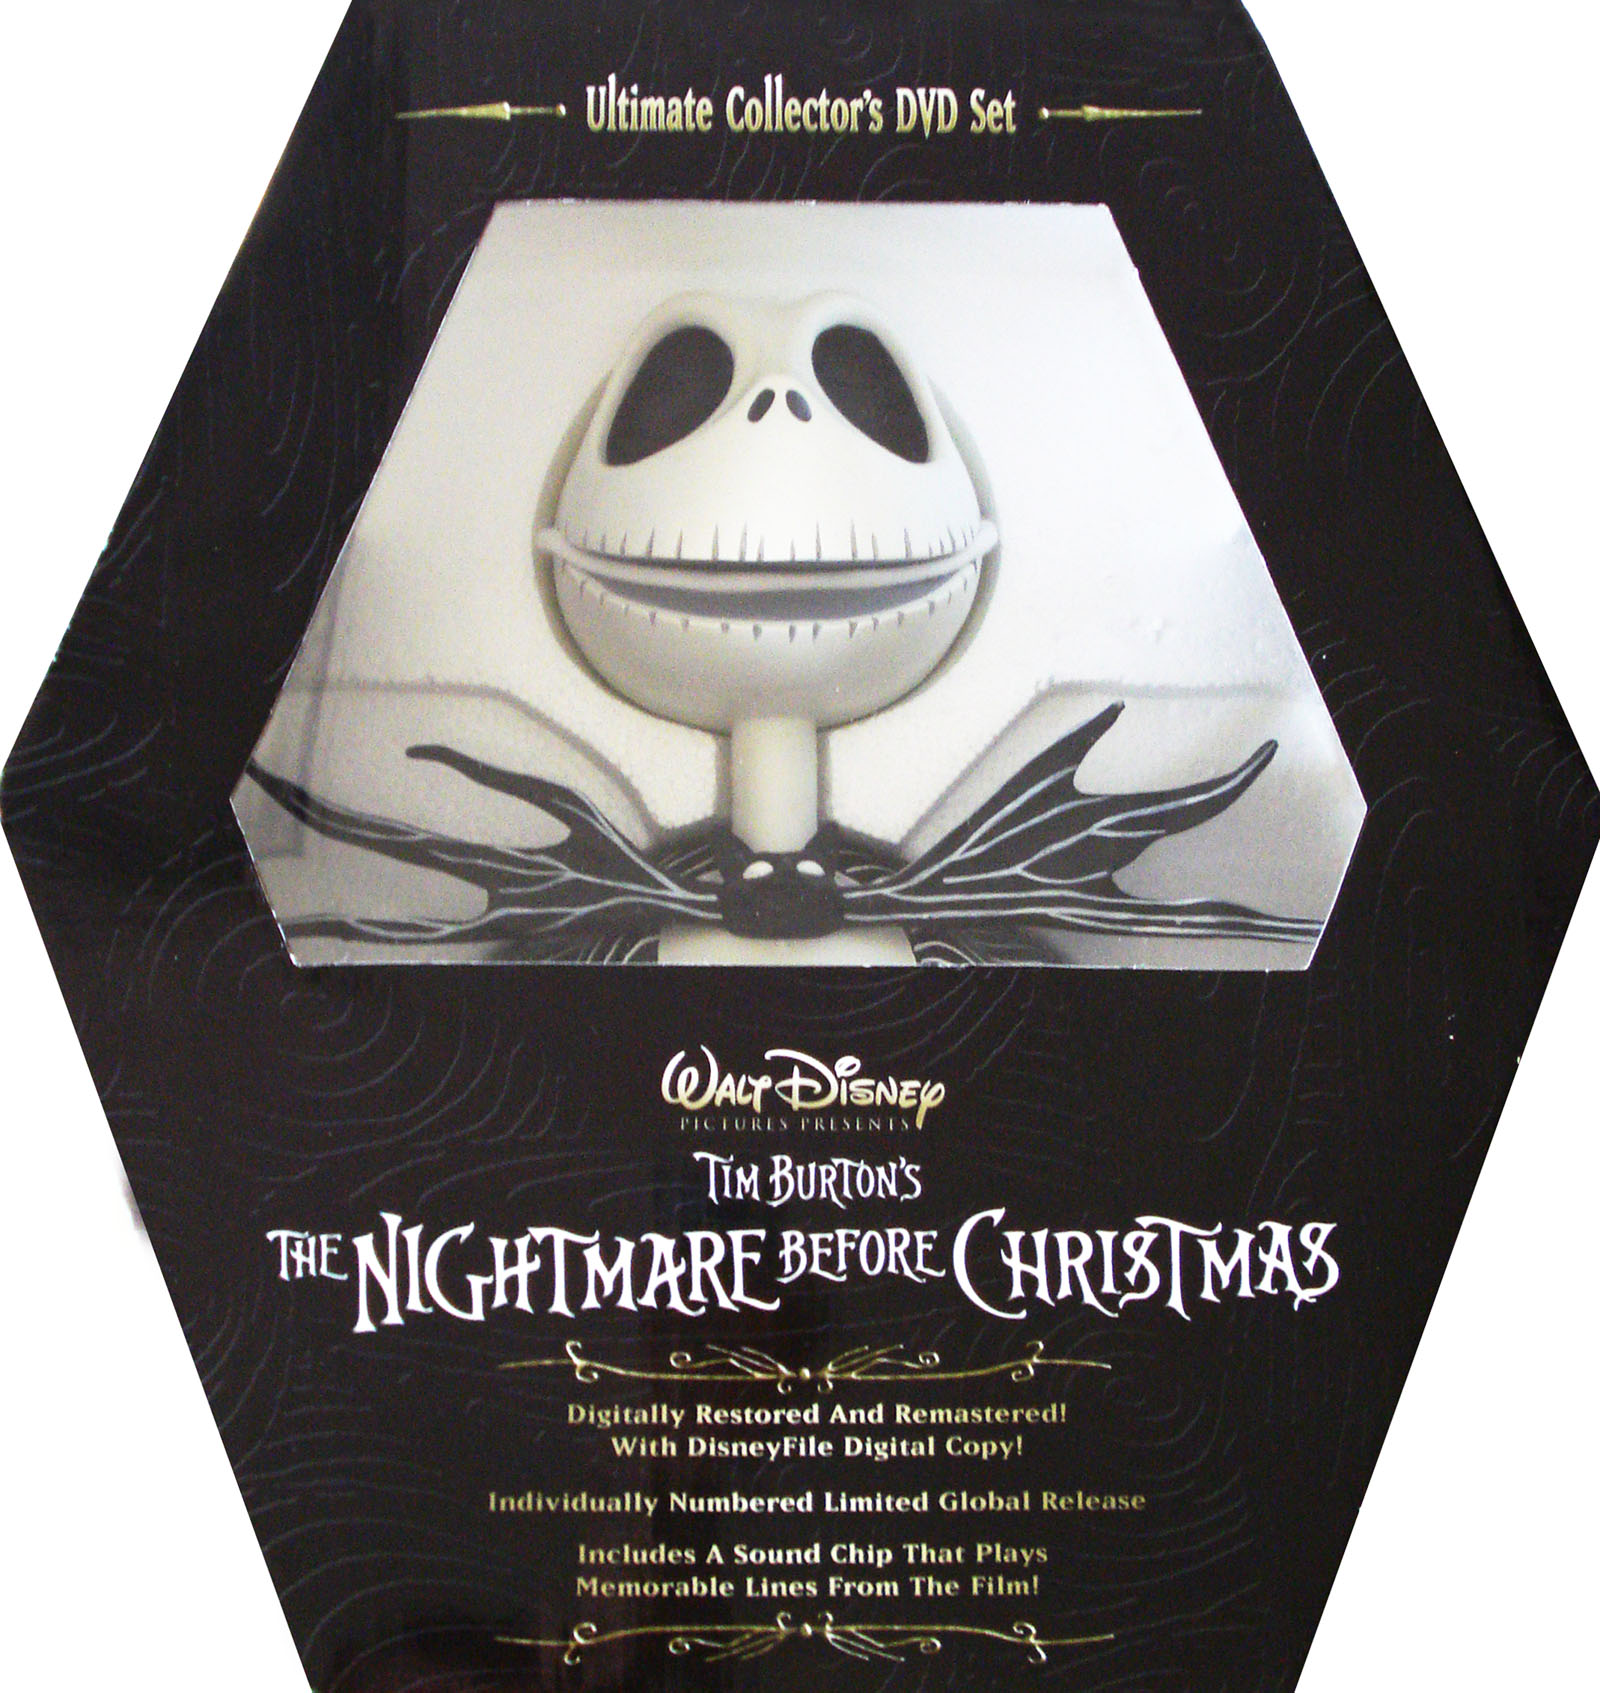 The Nightmare Before Christmas Digitally Remastered for DVD and